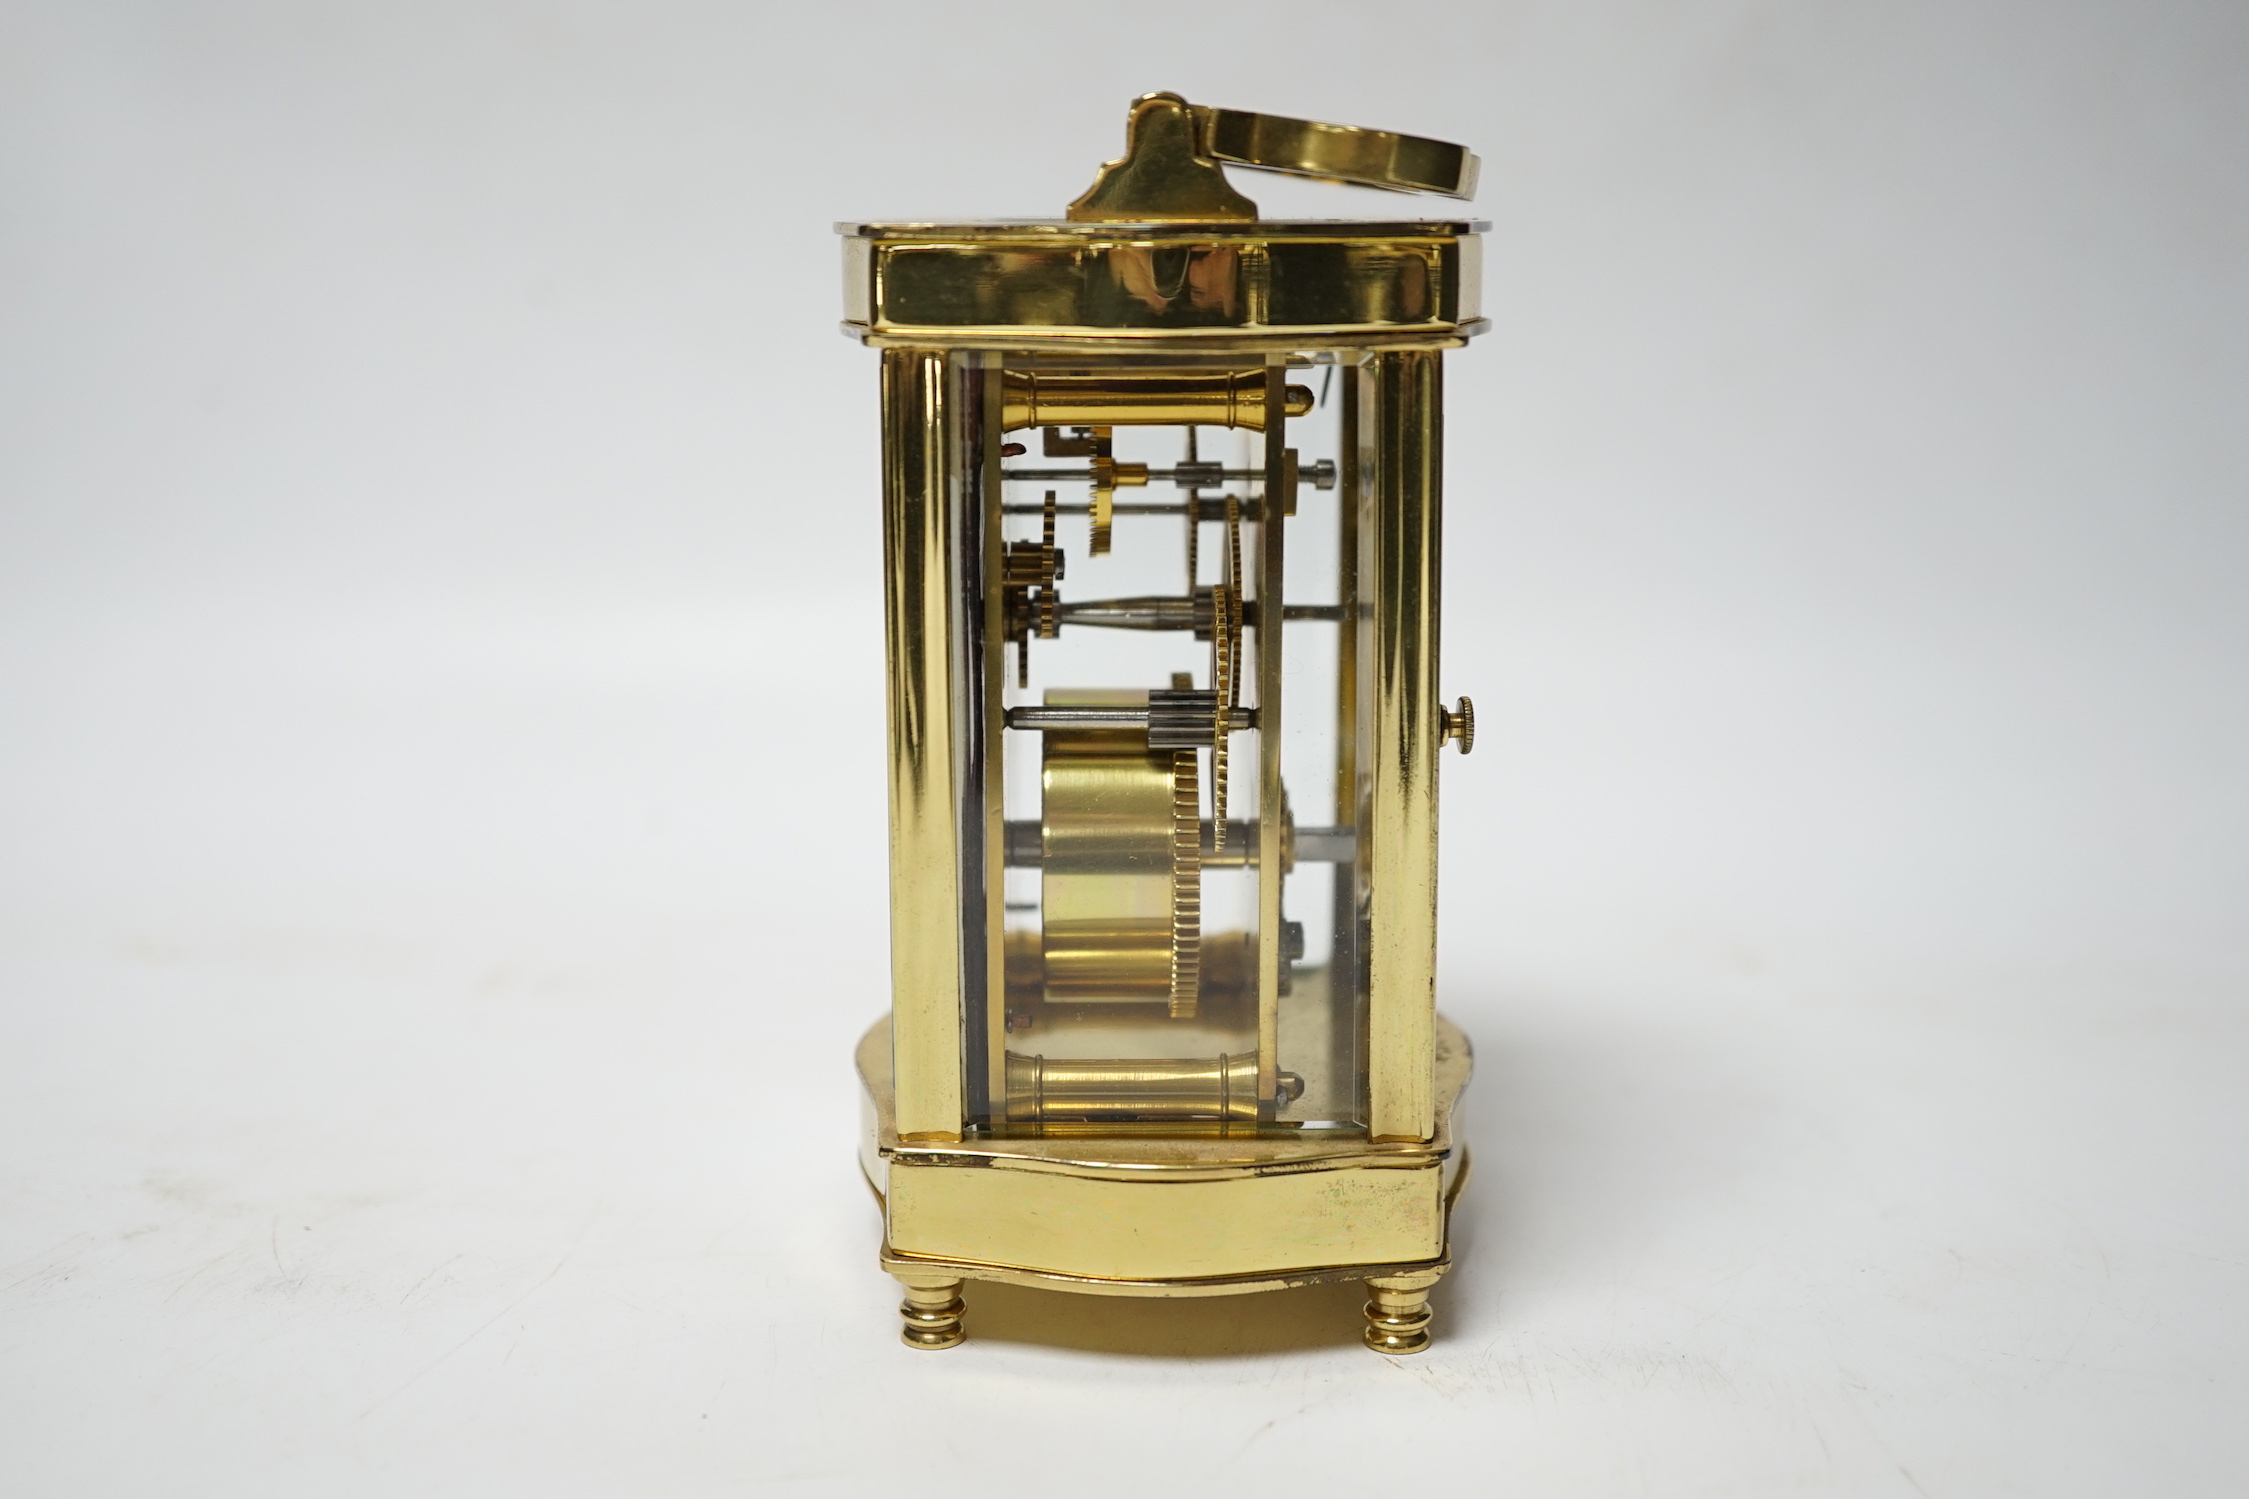 A cased carriage timepiece, P. Orr and Sons, Madras, timepiece 11.5 cm high